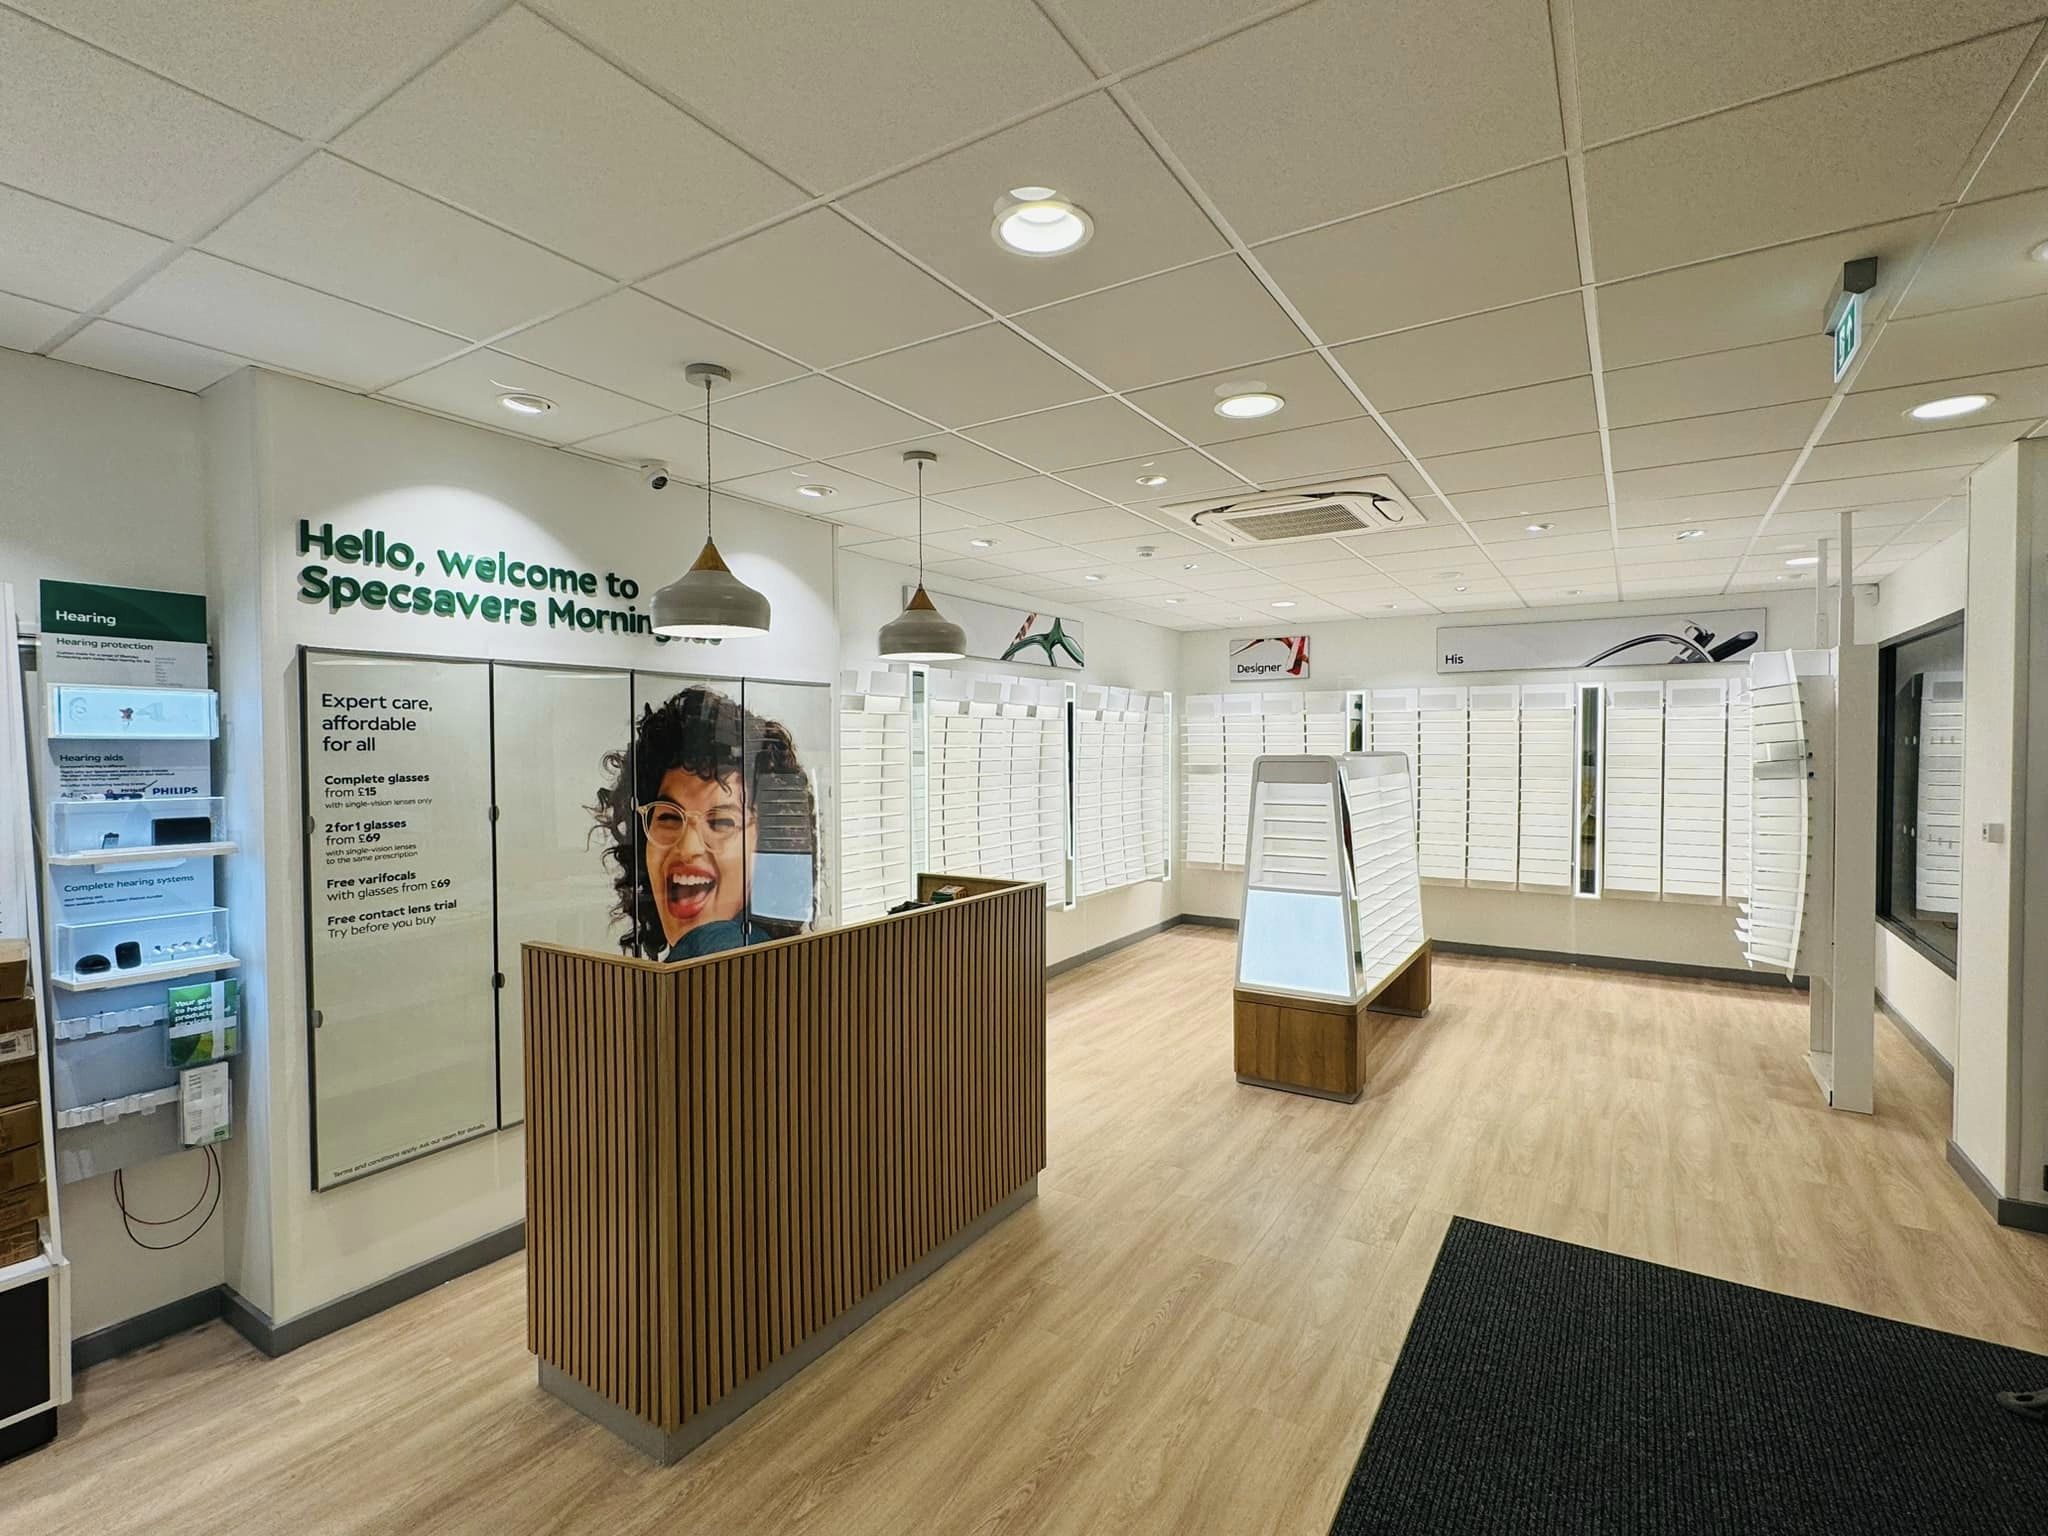 Specsavers are on the move